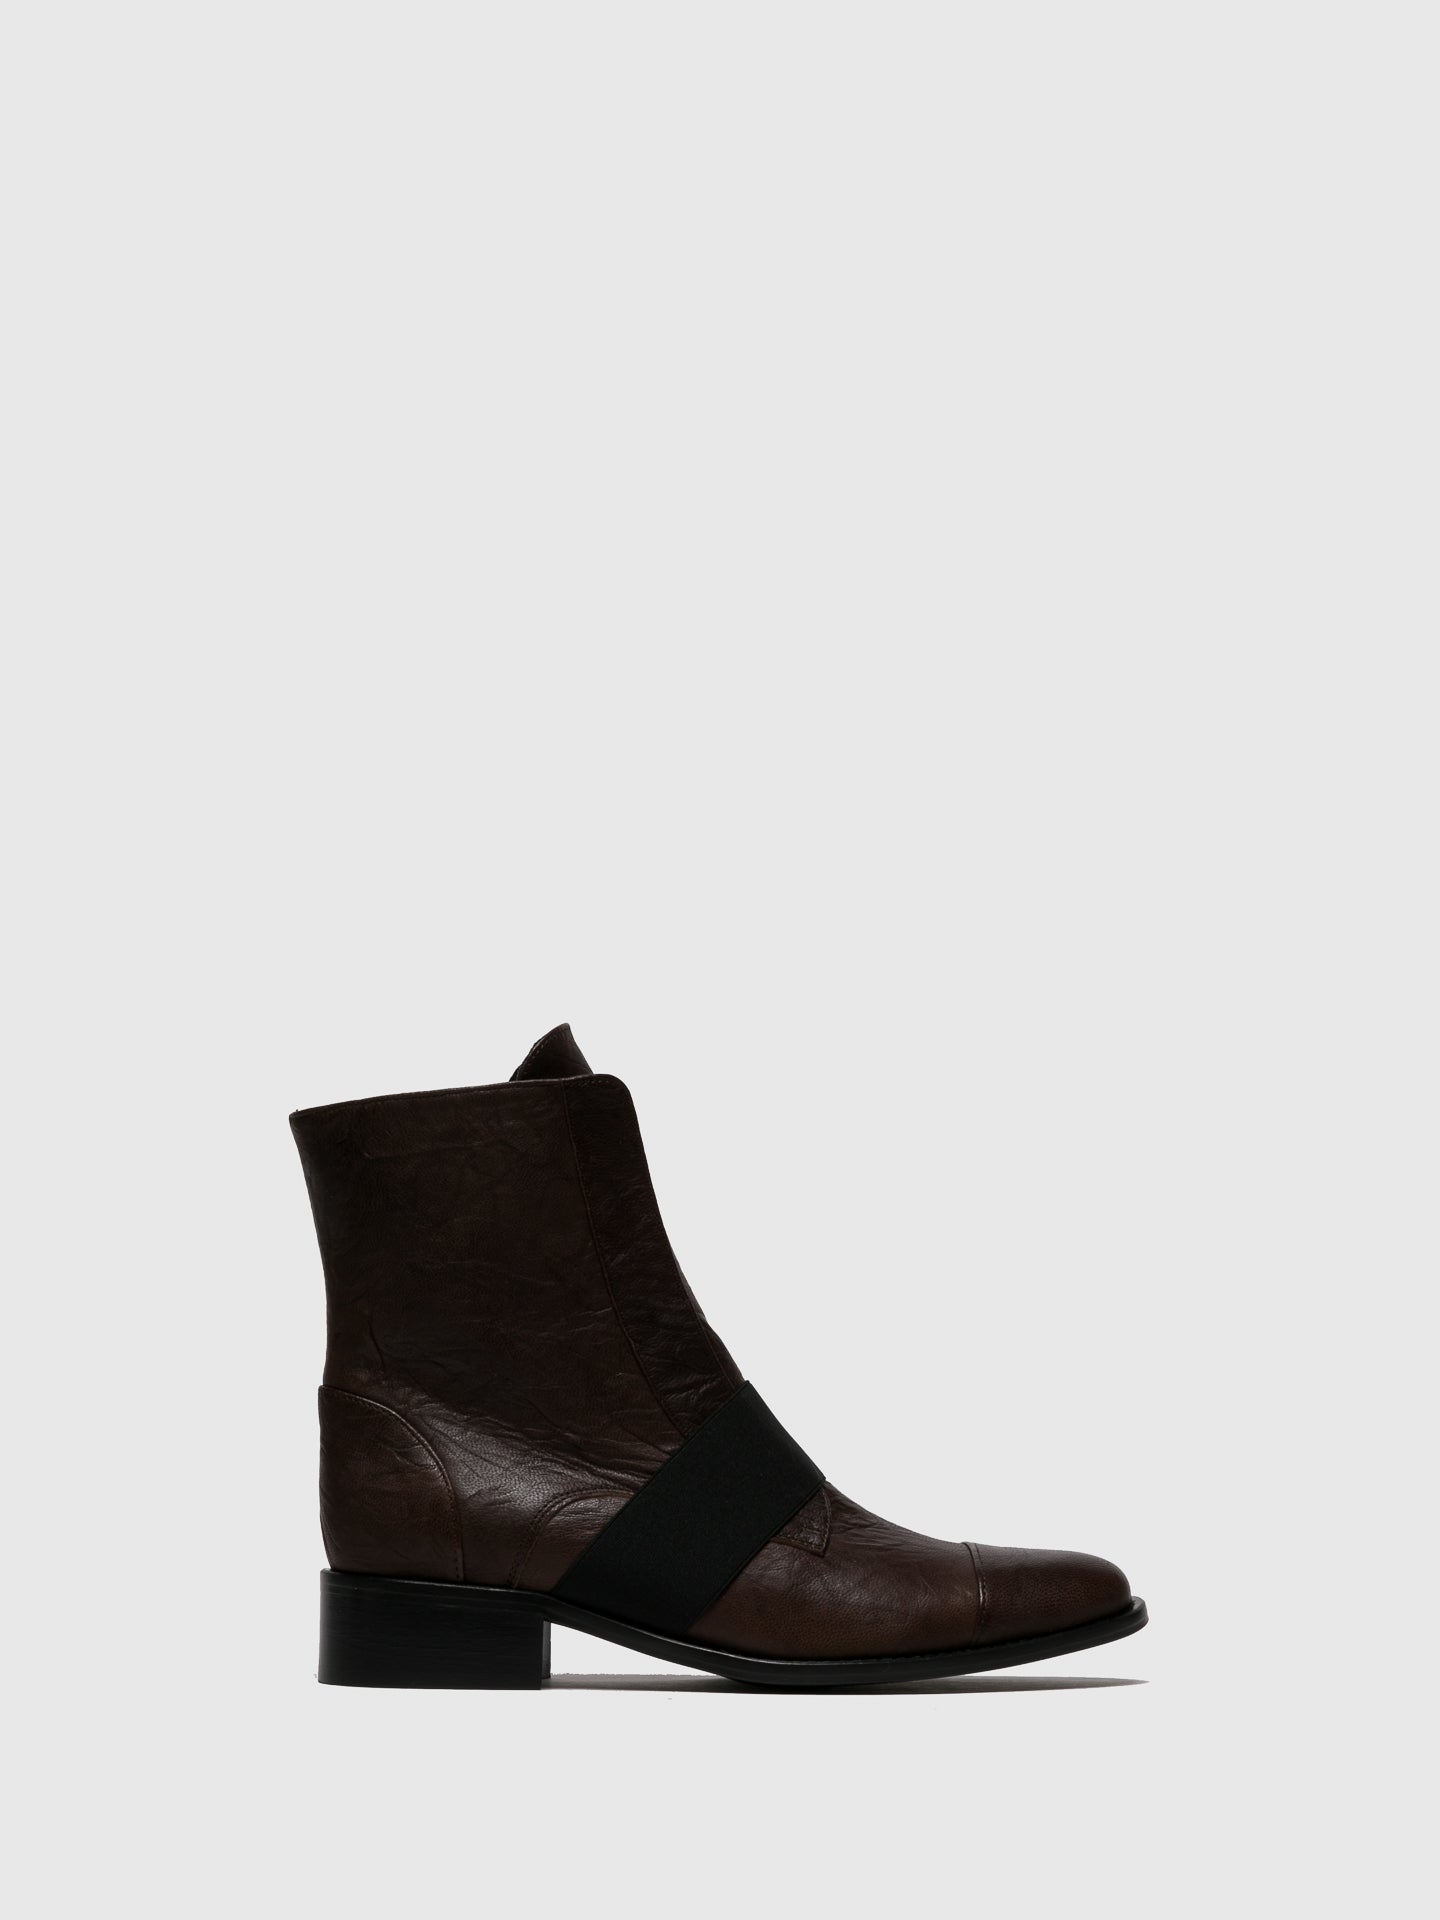 JJ Heitor Brown Elasticated Ankle Boots